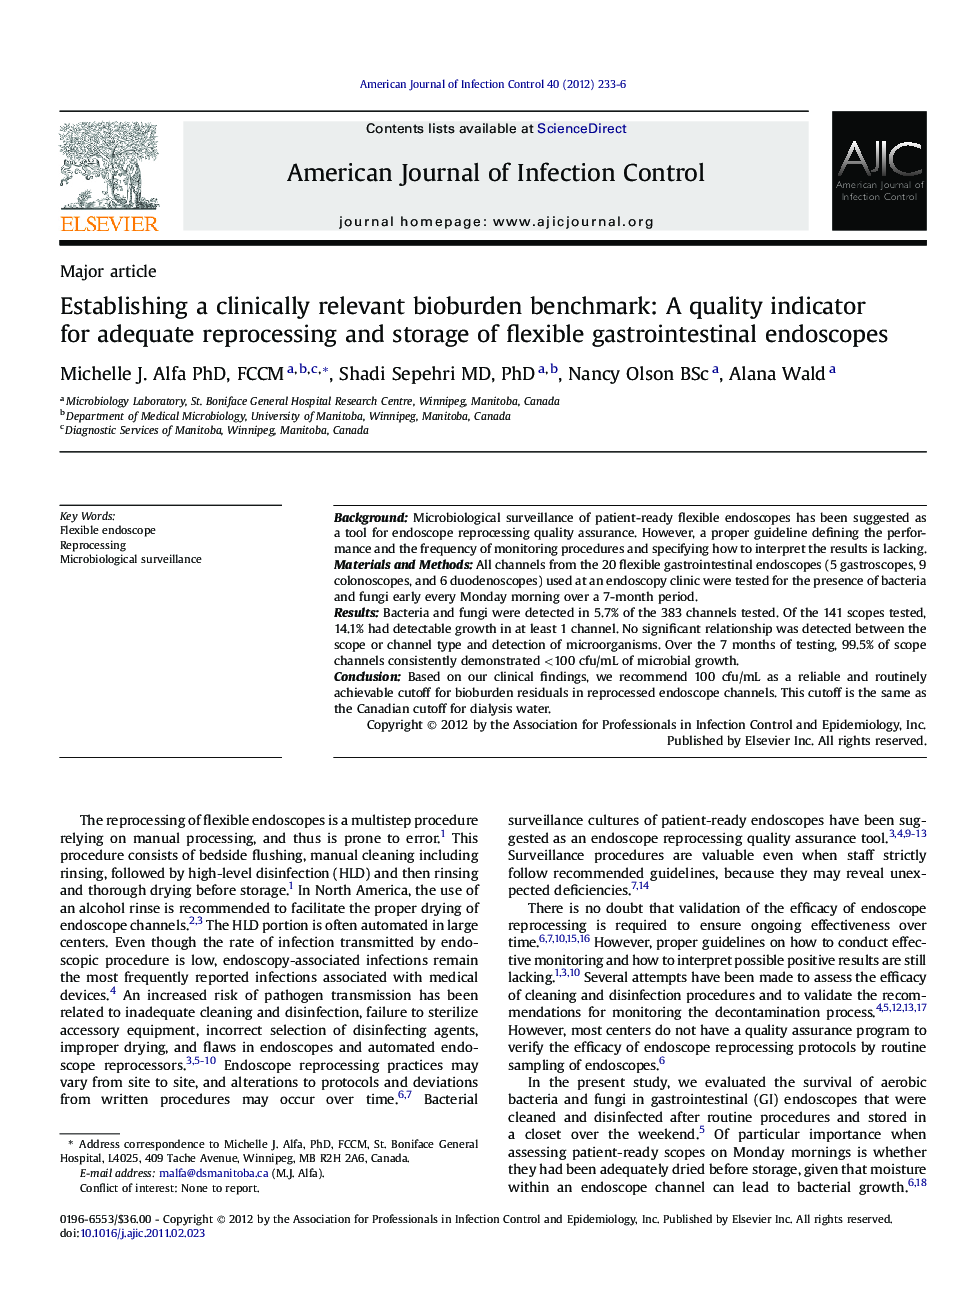 Establishing a clinically relevant bioburden benchmark: A quality indicator for adequate reprocessing and storage of flexible gastrointestinal endoscopes 